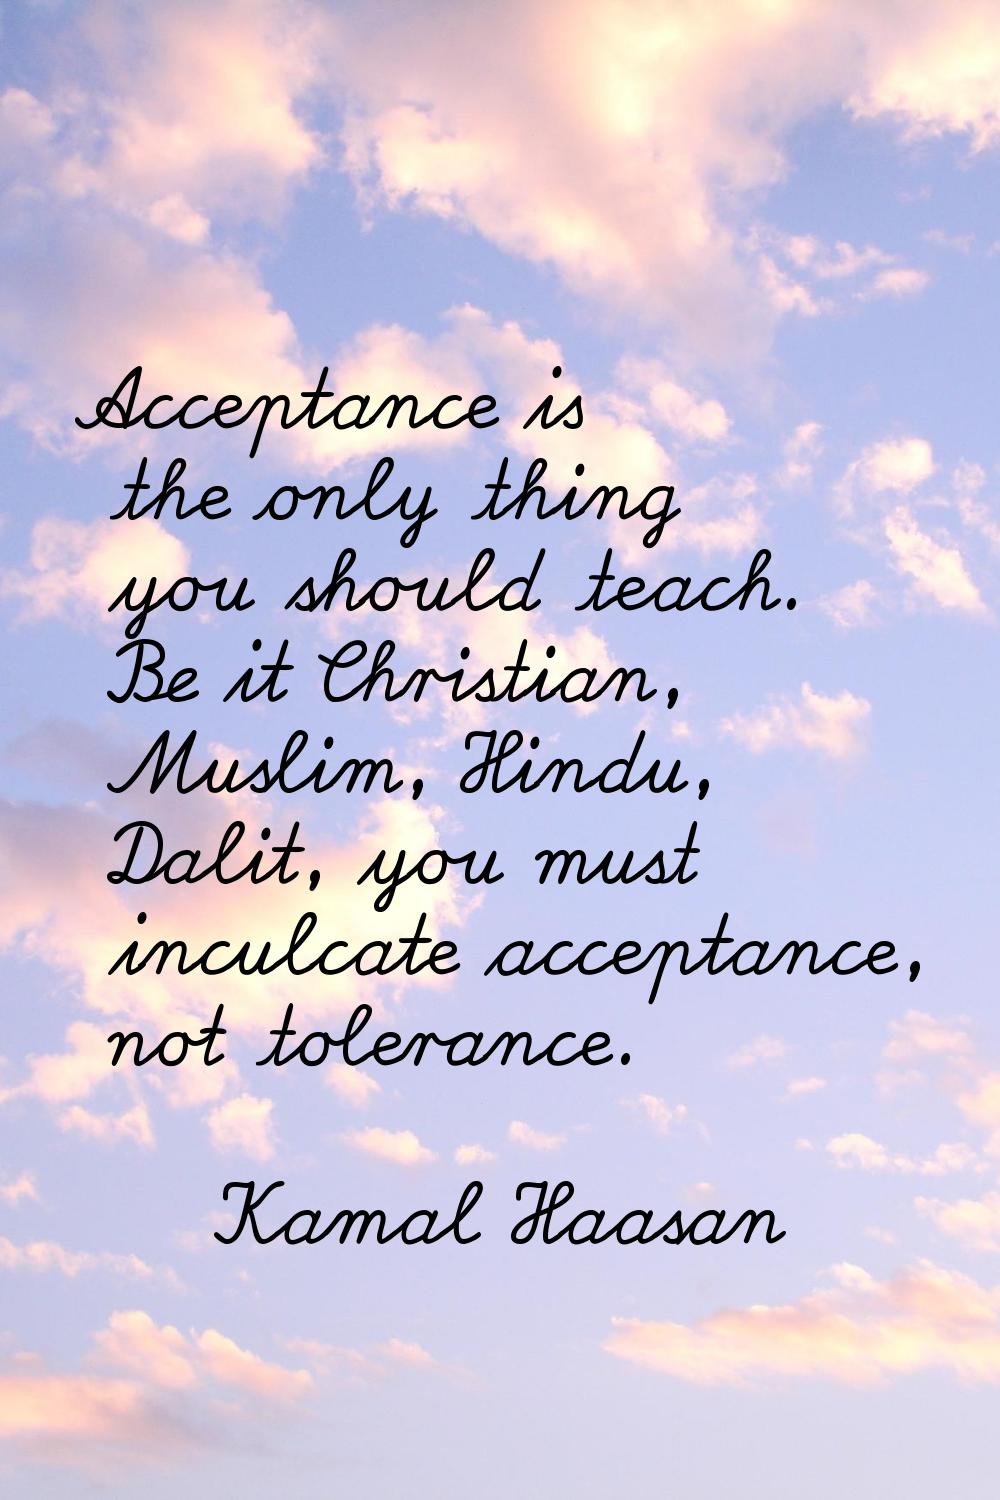 Acceptance is the only thing you should teach. Be it Christian, Muslim, Hindu, Dalit, you must incu